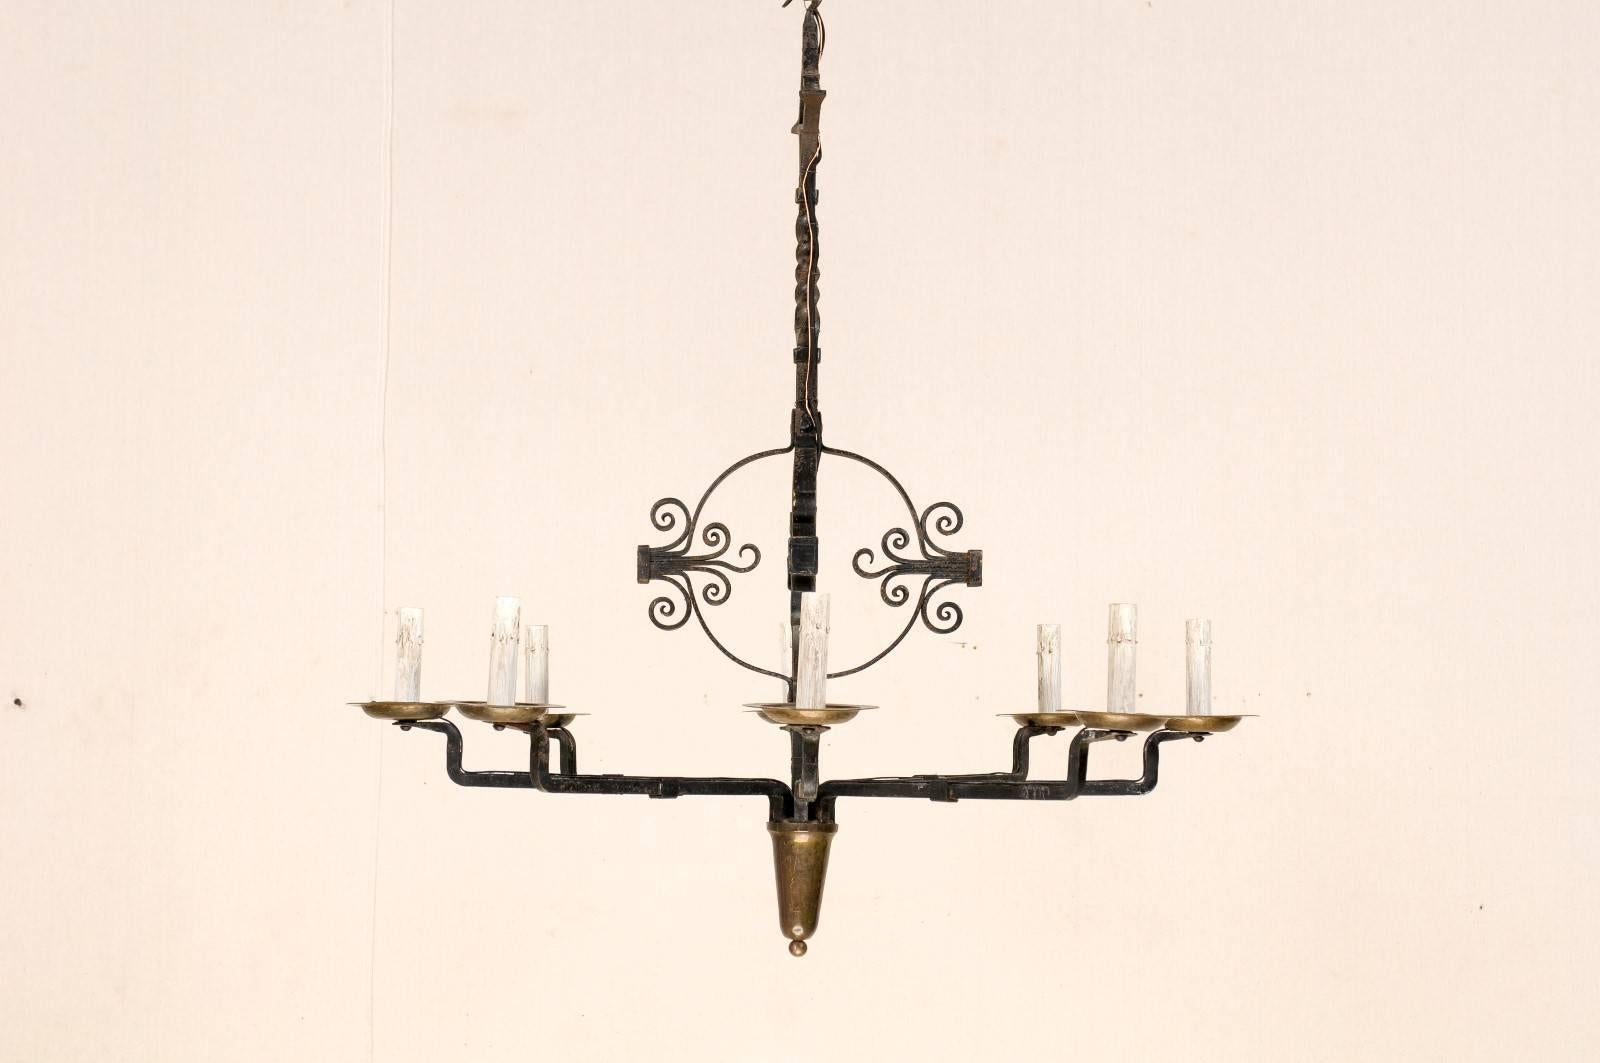 An Italian vintage circular eight-light wrought iron chandelier. This mid-20th century Italian iron chandelier features a central post with globe flanked with volutes on each side, leading to a twisted beam with a diamond shaped post top and hook.